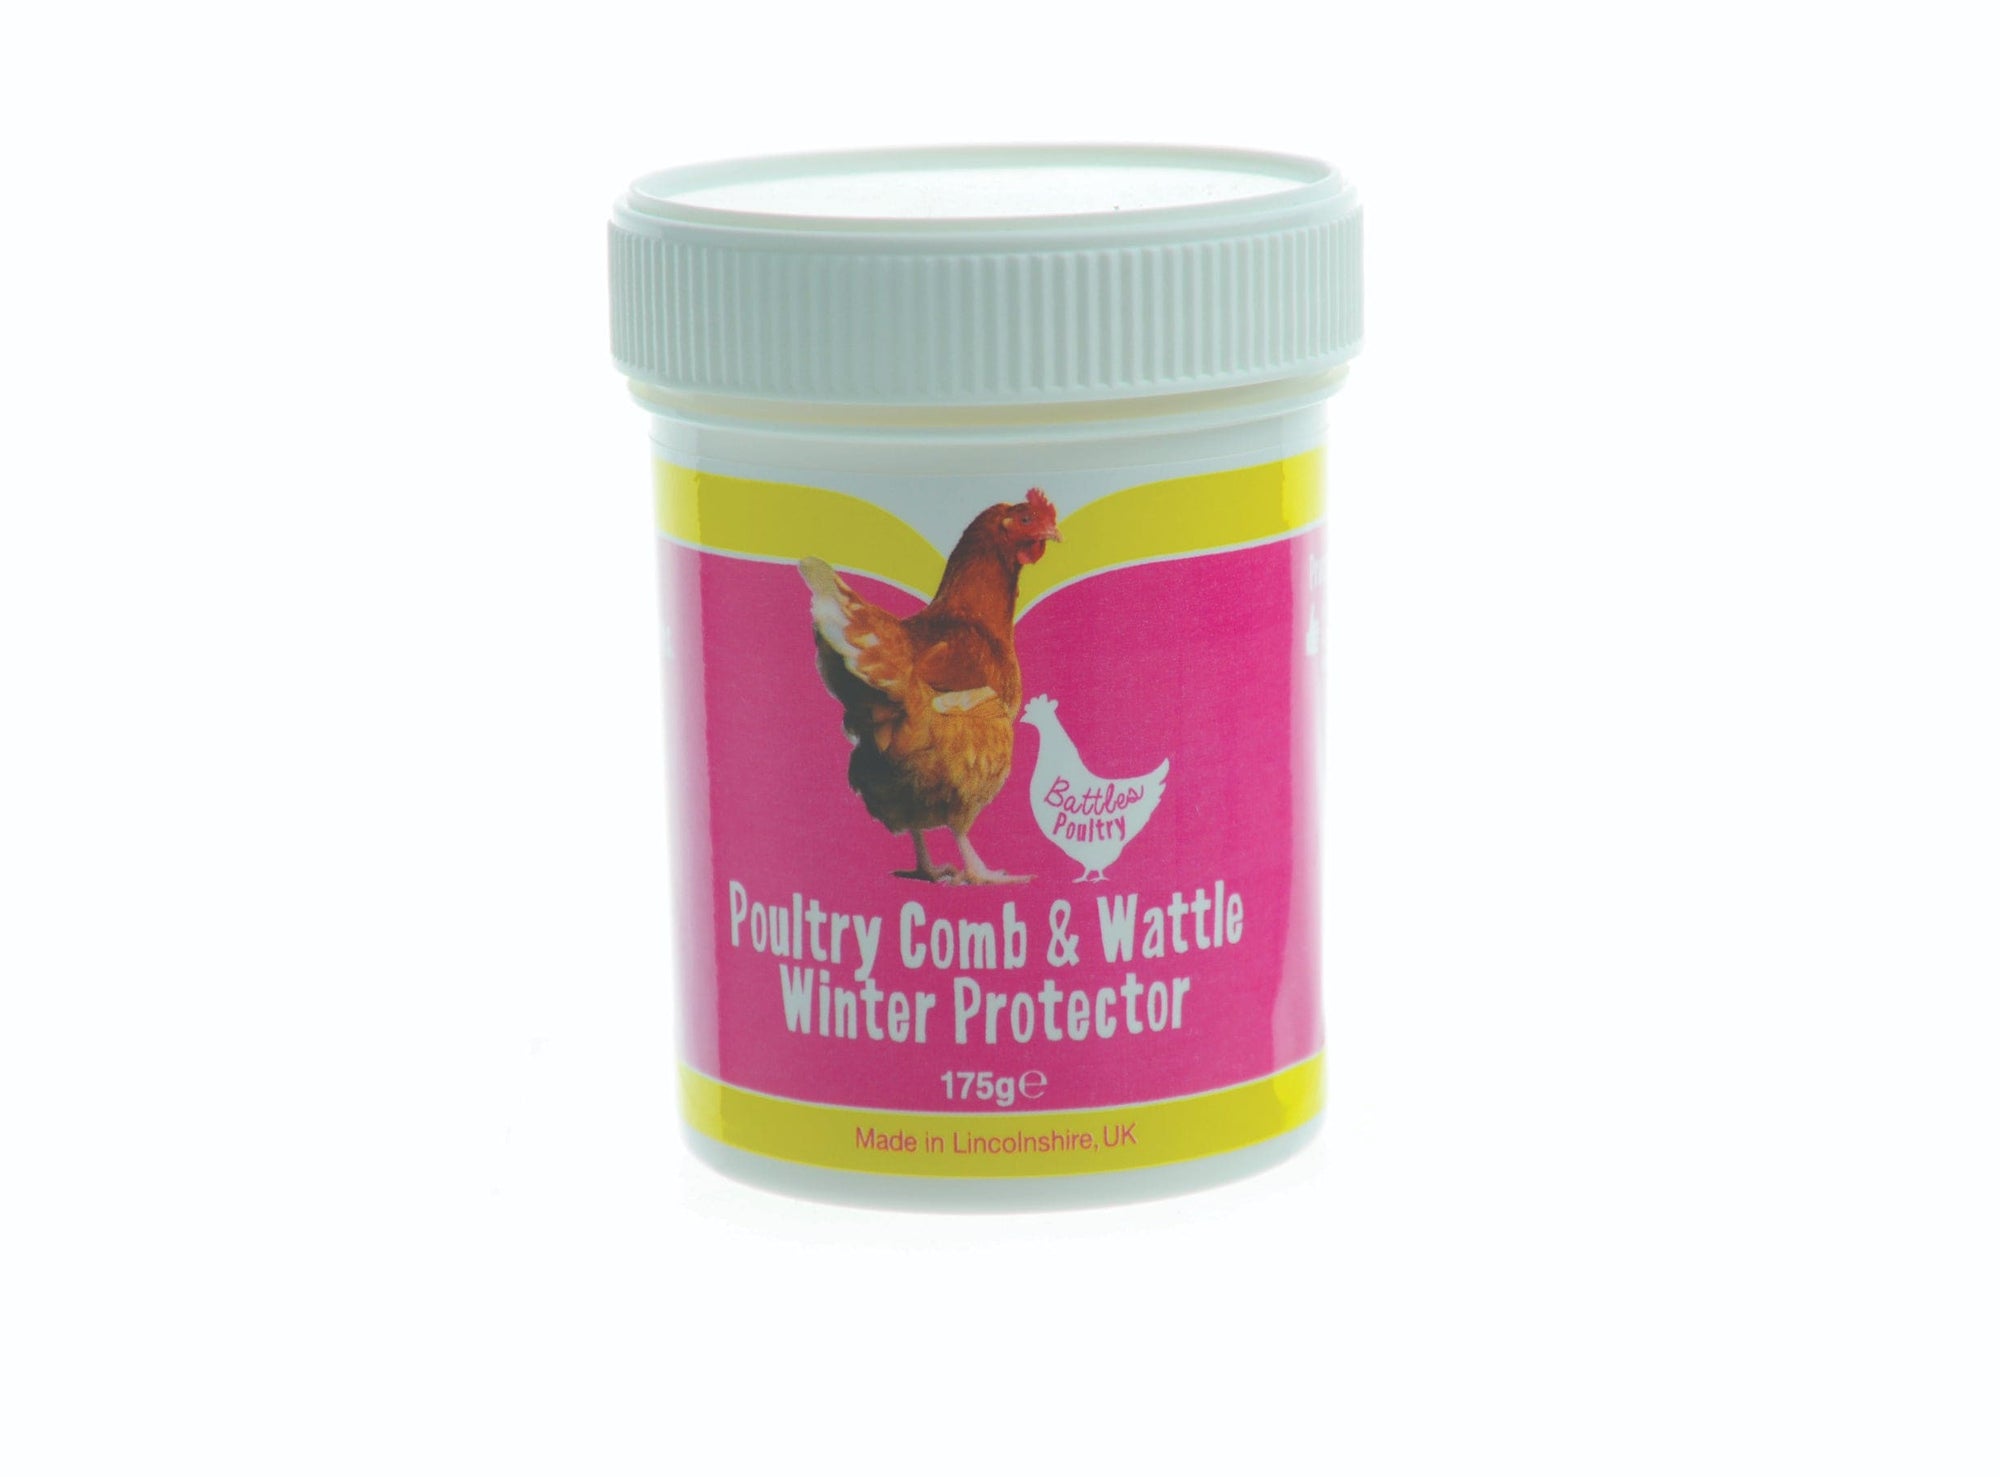 Battles poultry comb & wattle winter protector